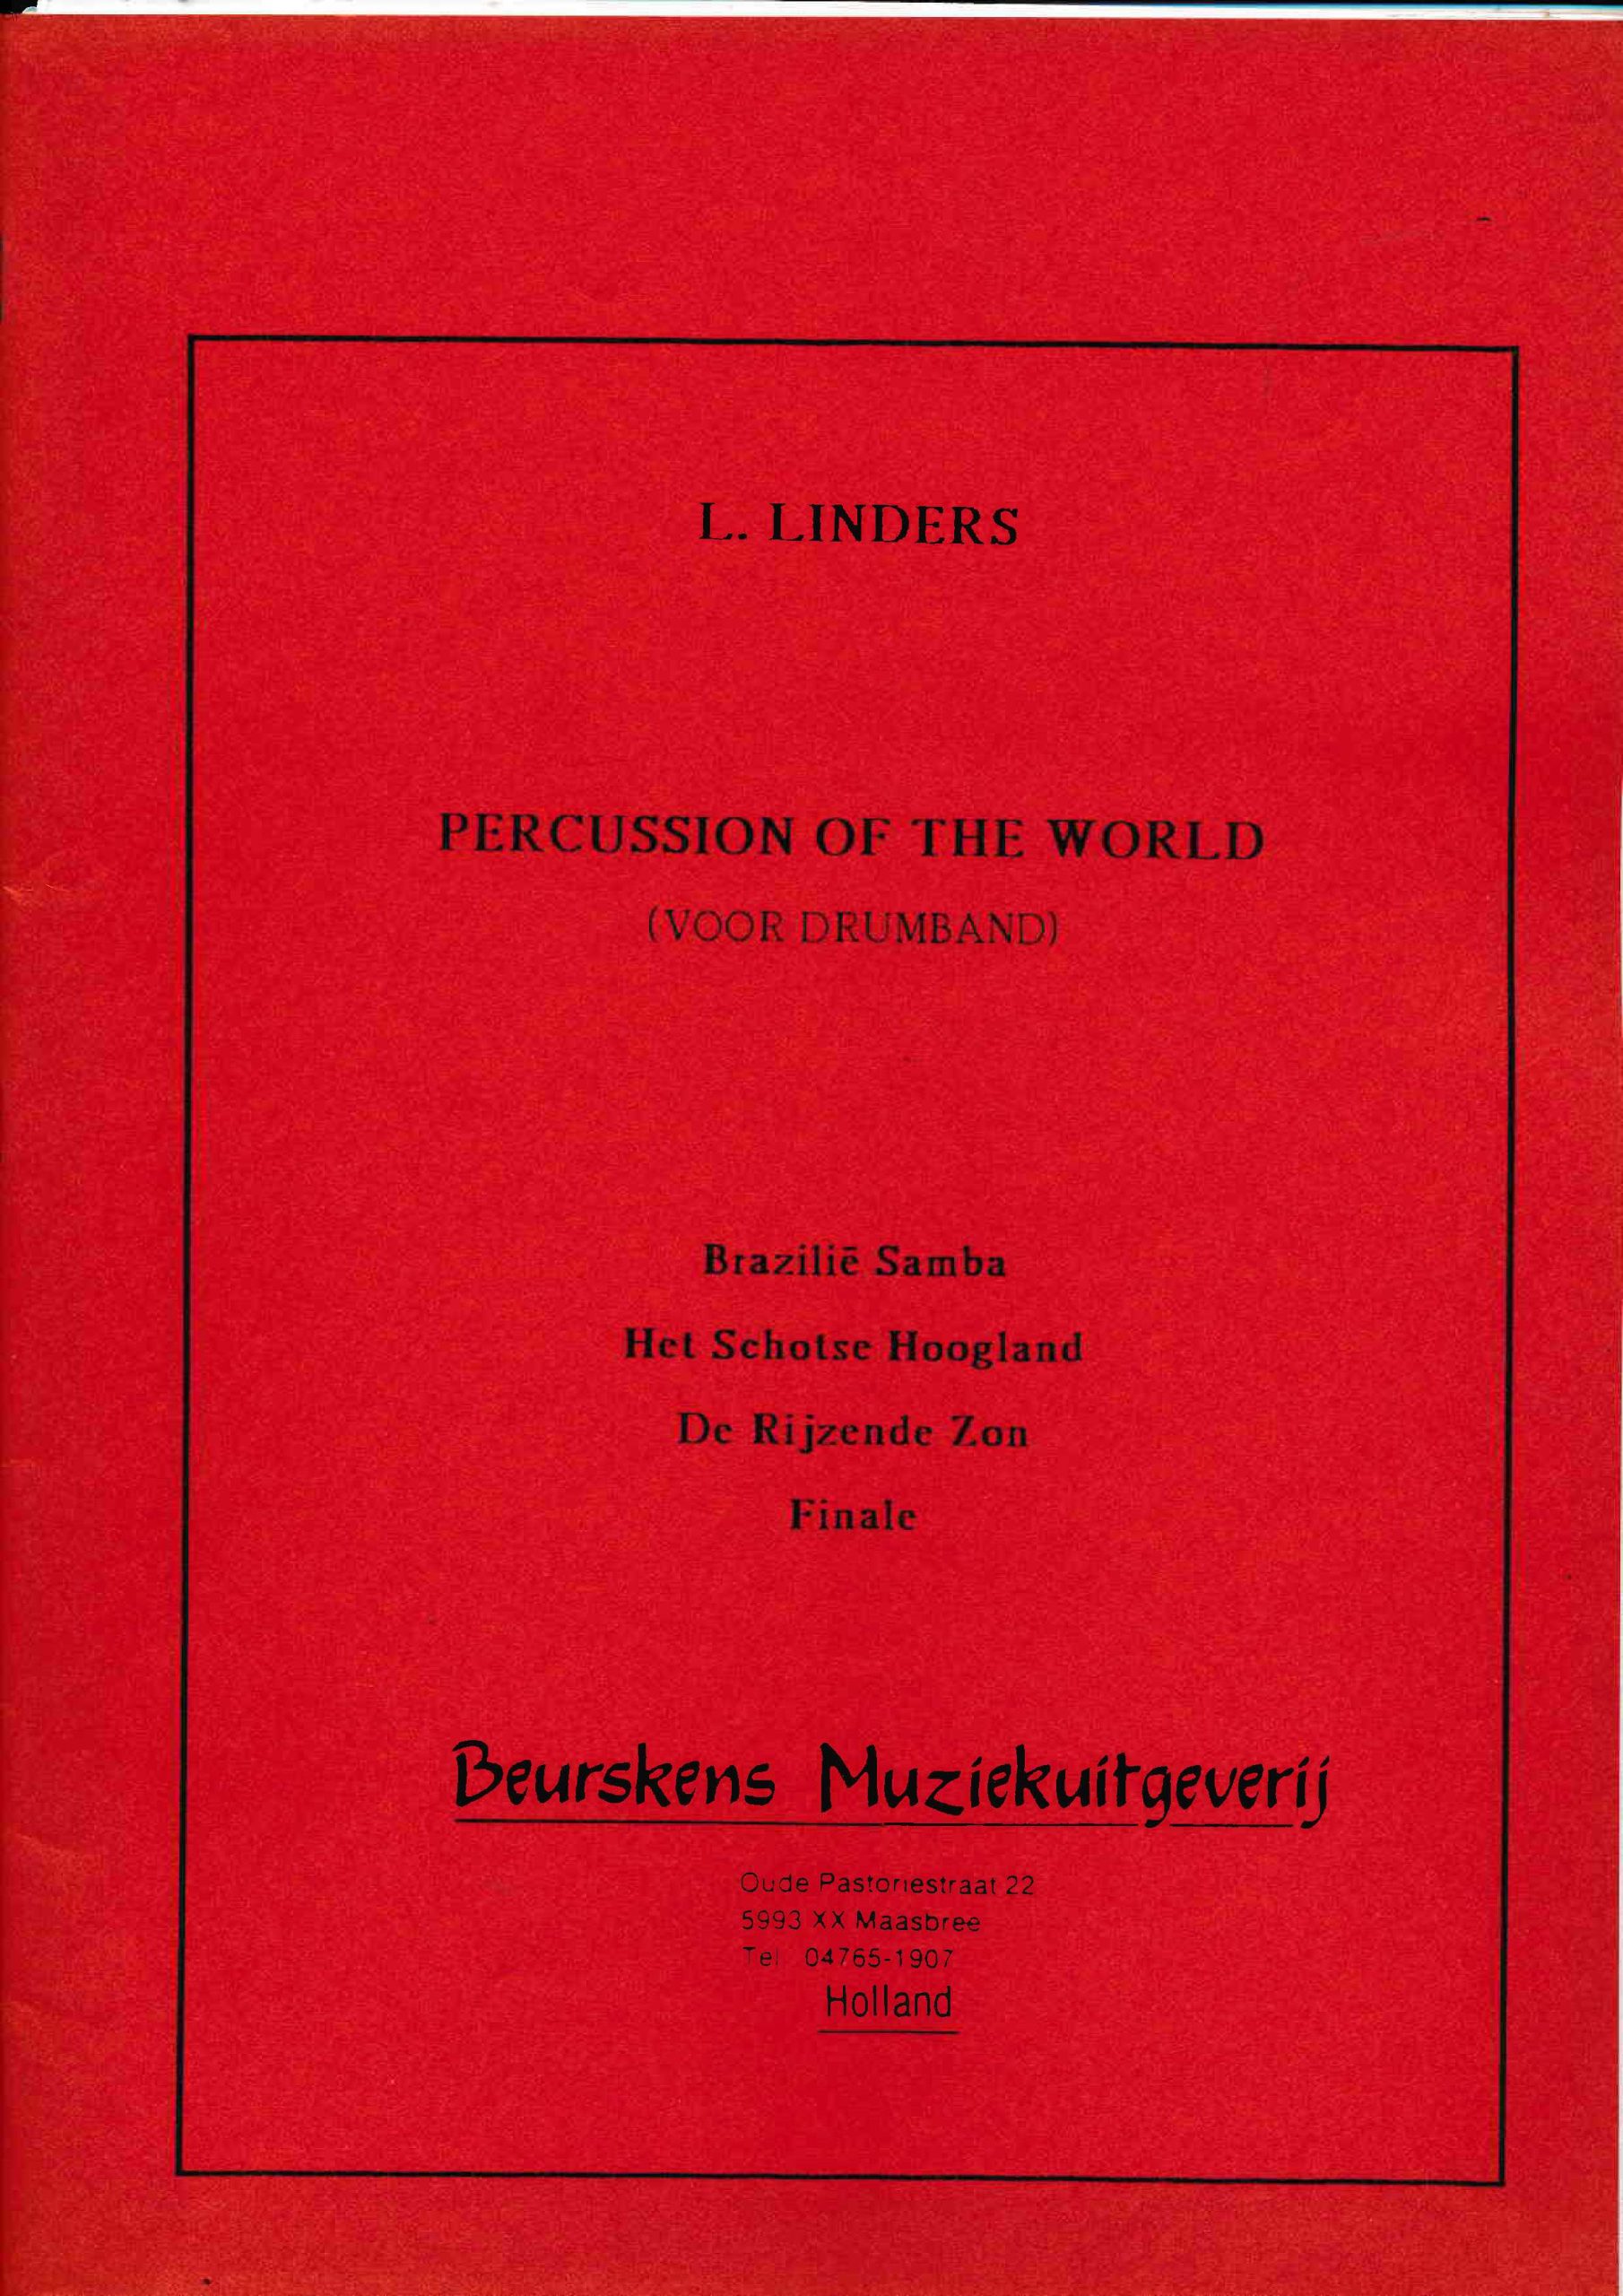 Percussion of the World by L. Linders